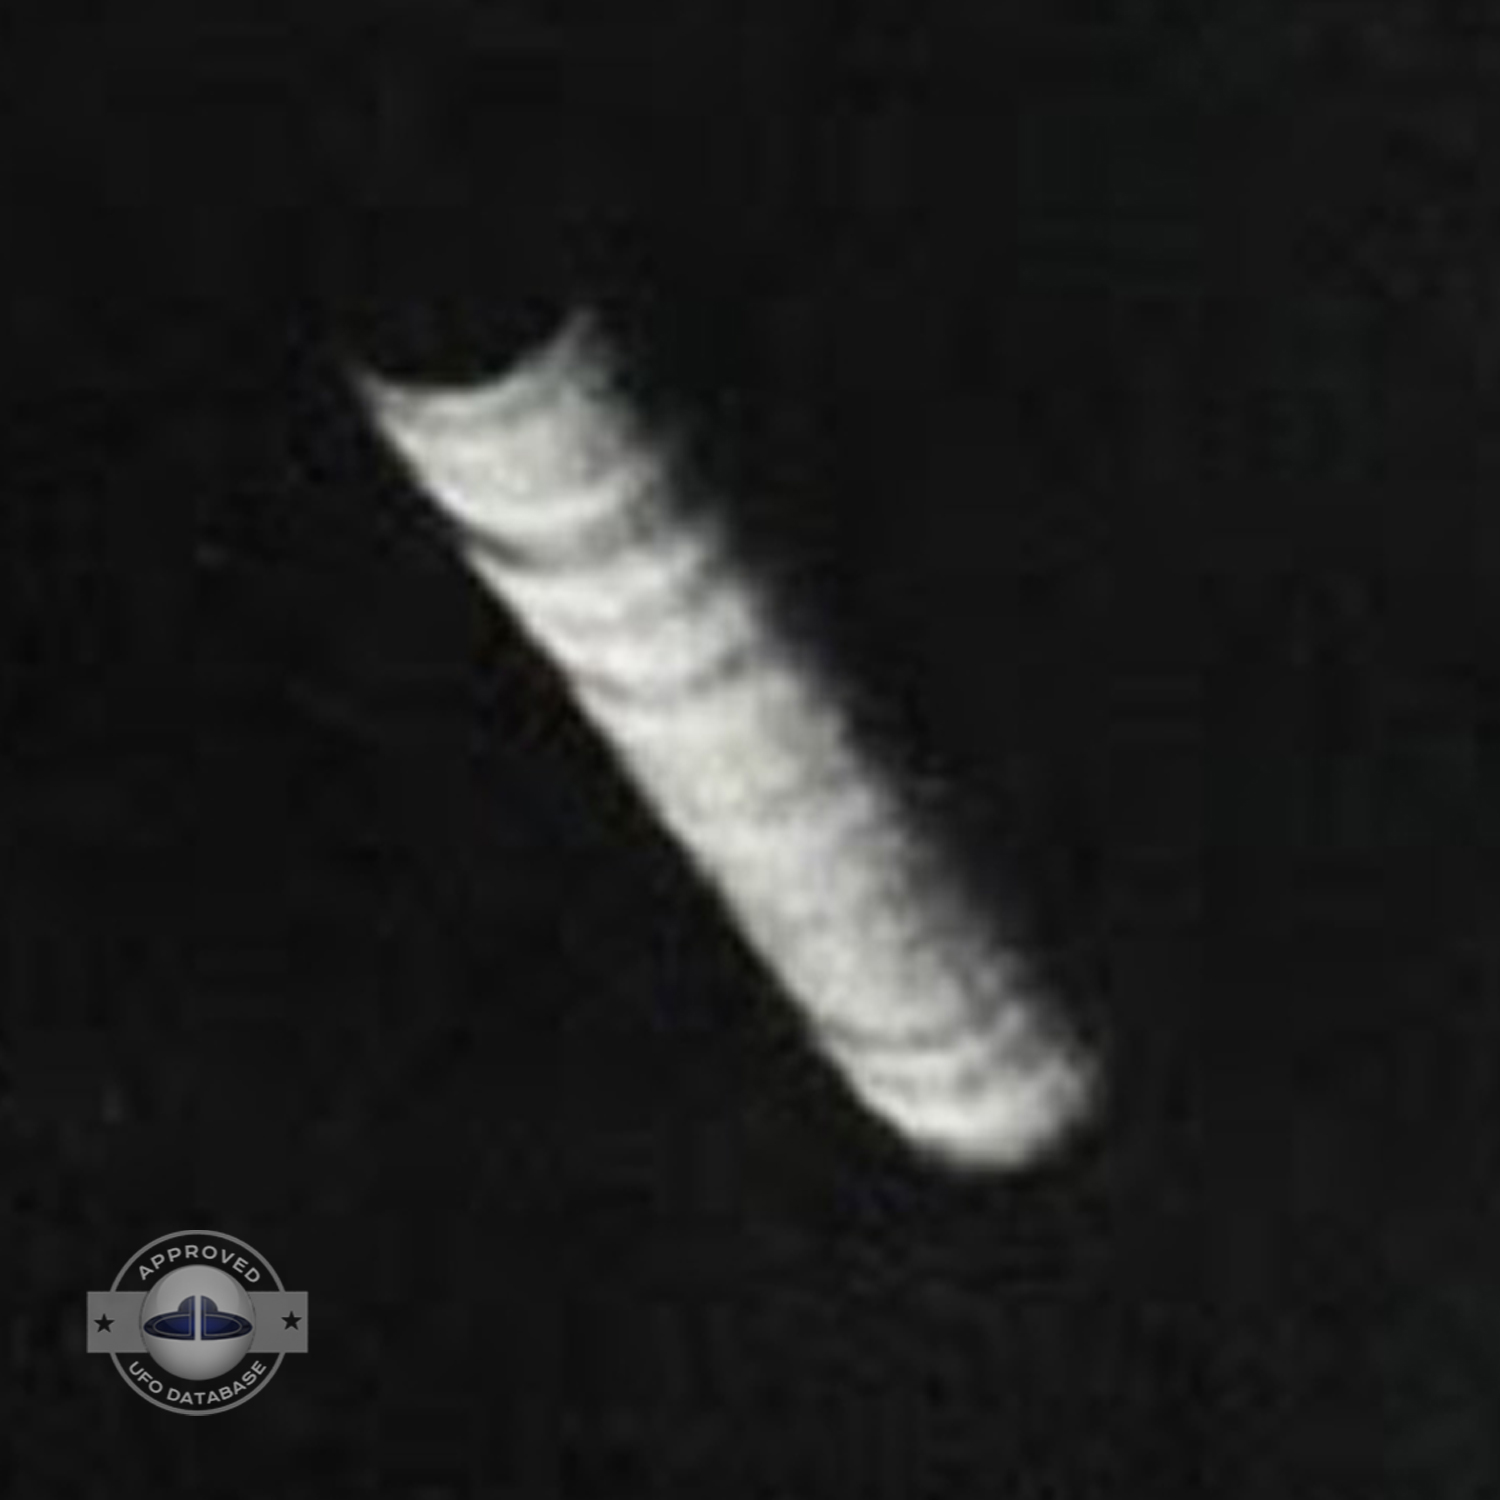 Tube shaped UFO - We can see the black hole at the end | New York UFO Picture #114-8